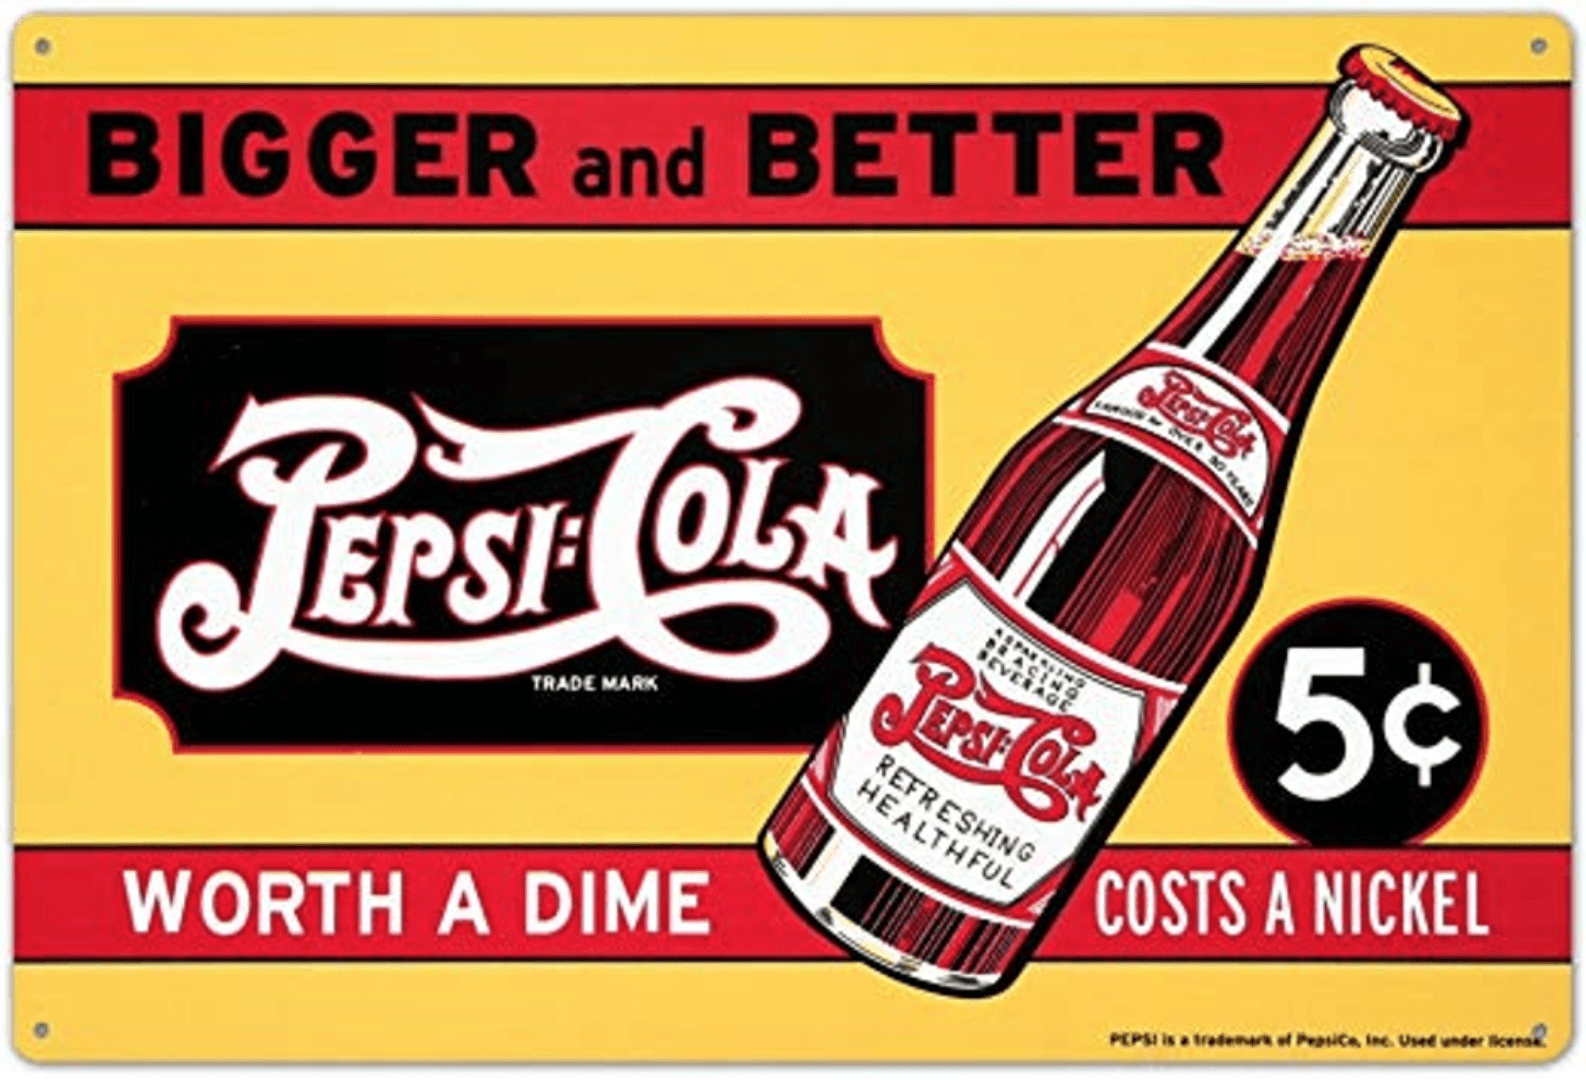 Pepsi Cola advertising sign from the 1940s